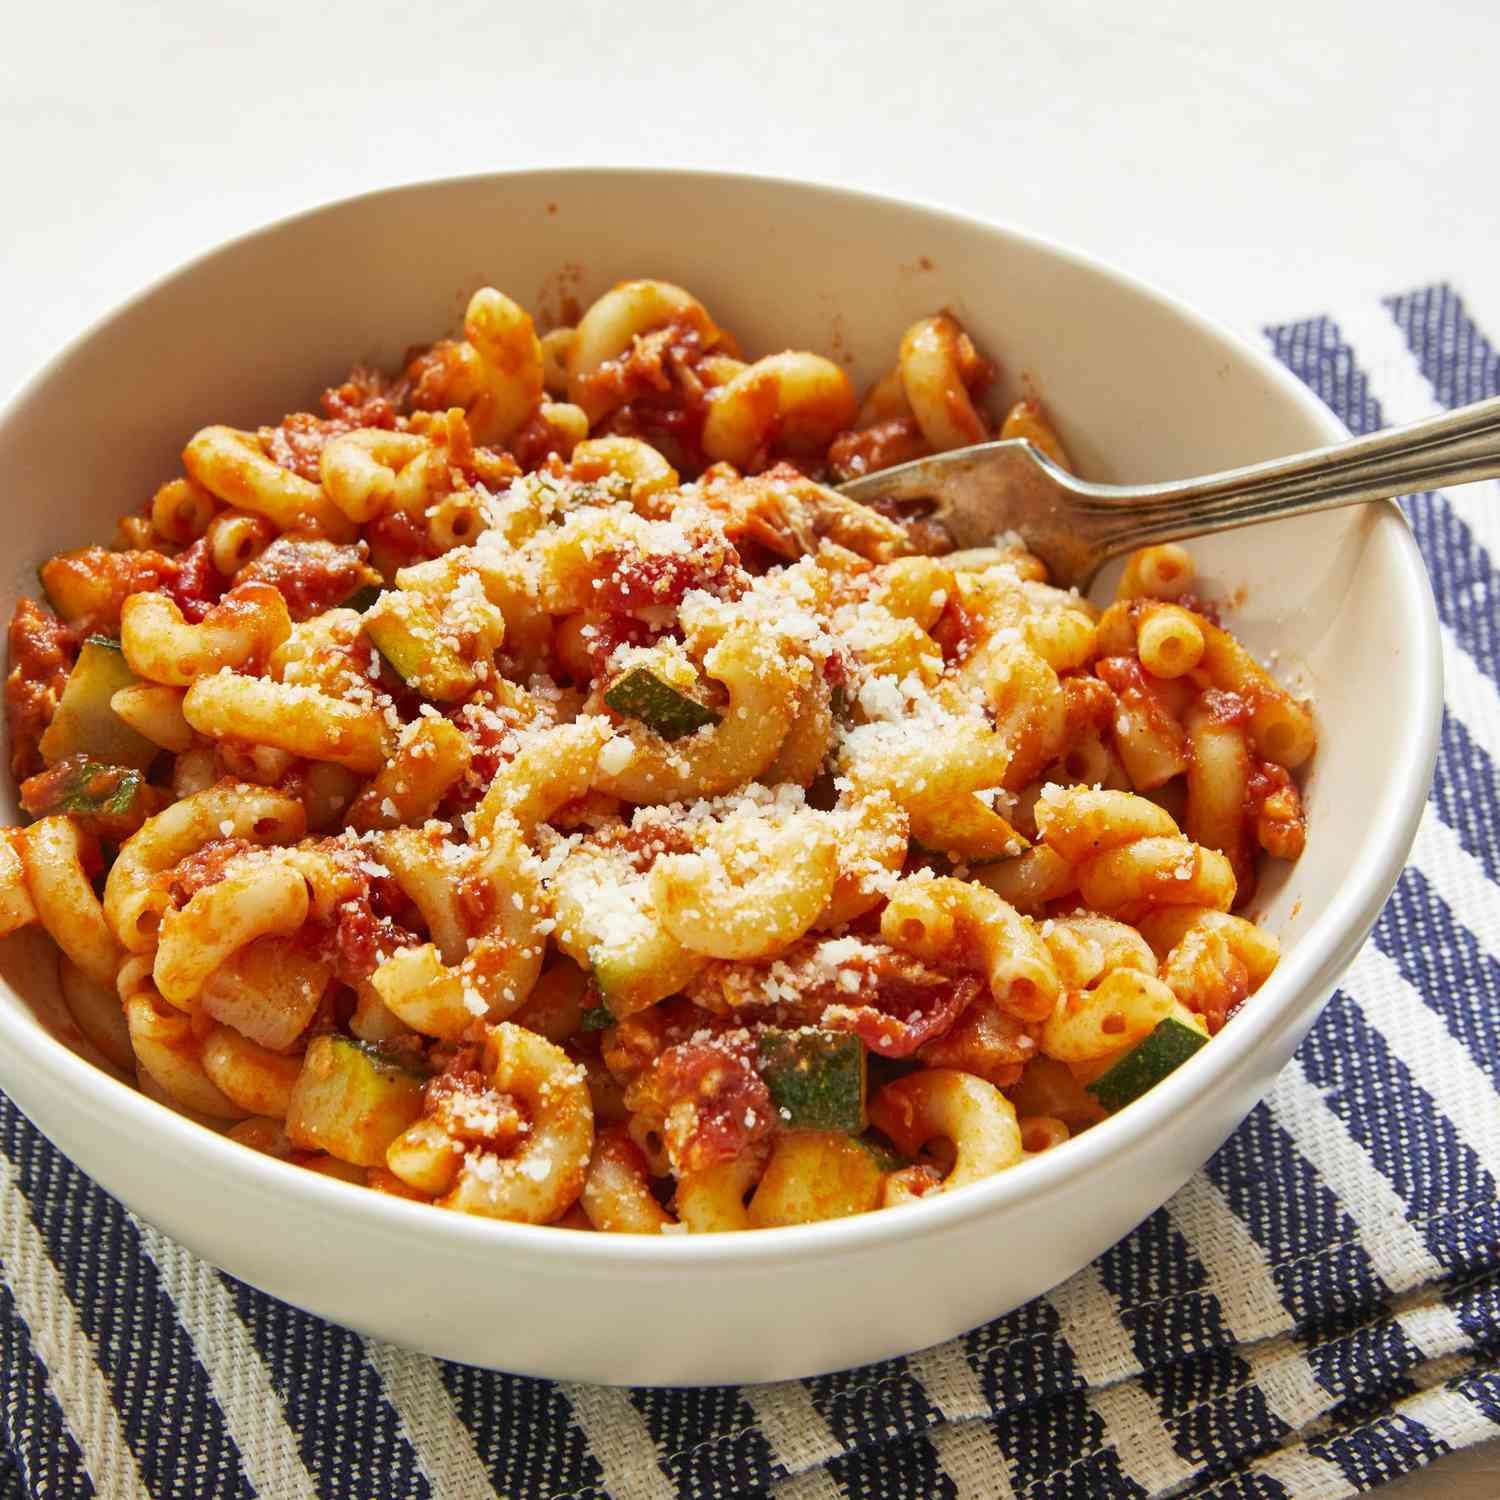 elbow pasta with zucchini and tuna in a red sauce